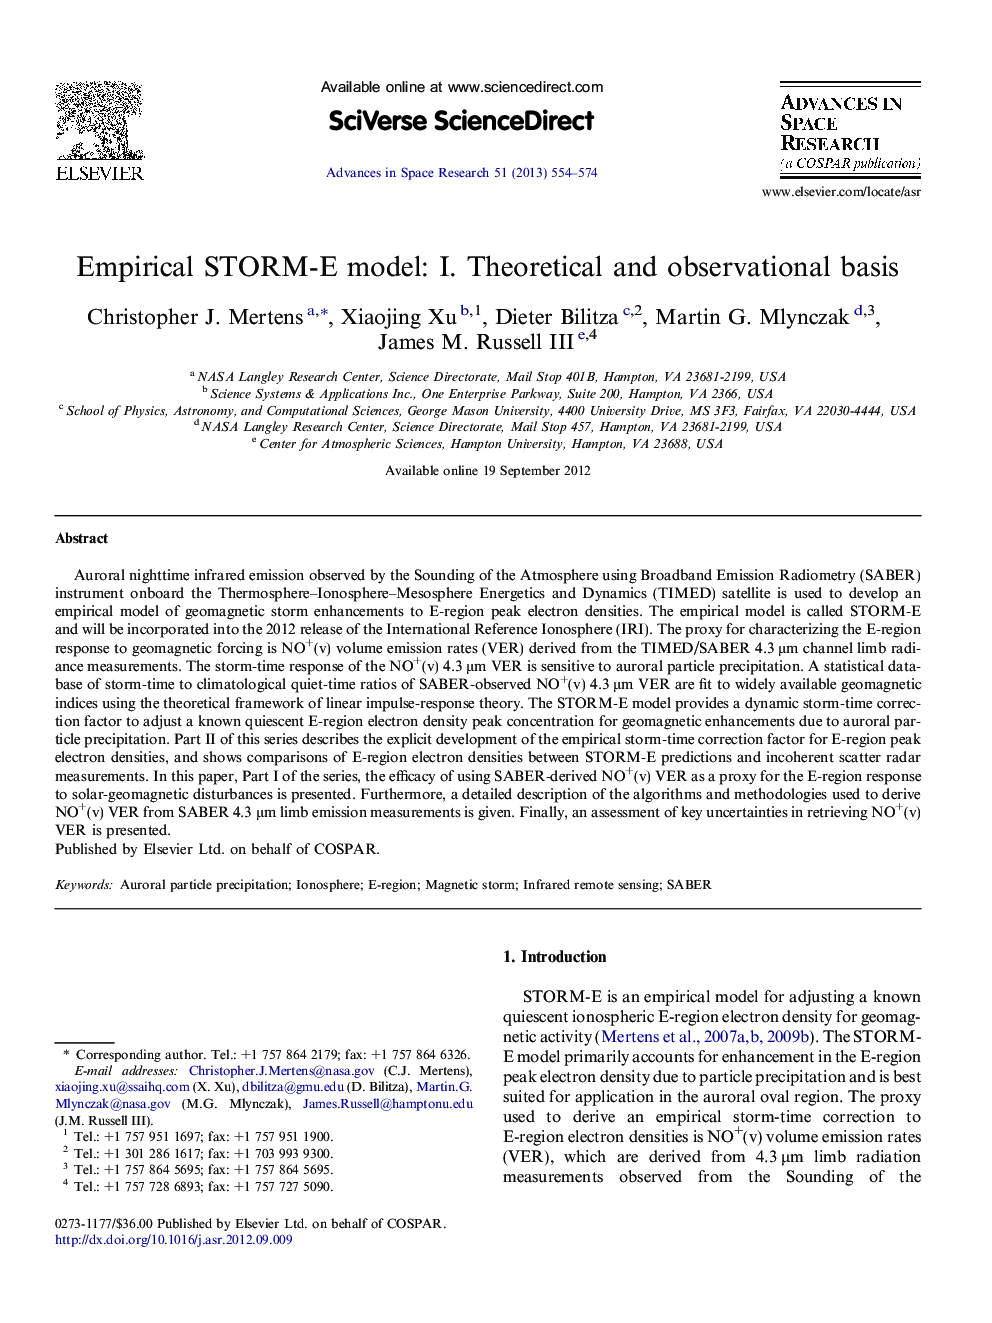 Empirical STORM-E model: I. Theoretical and observational basis